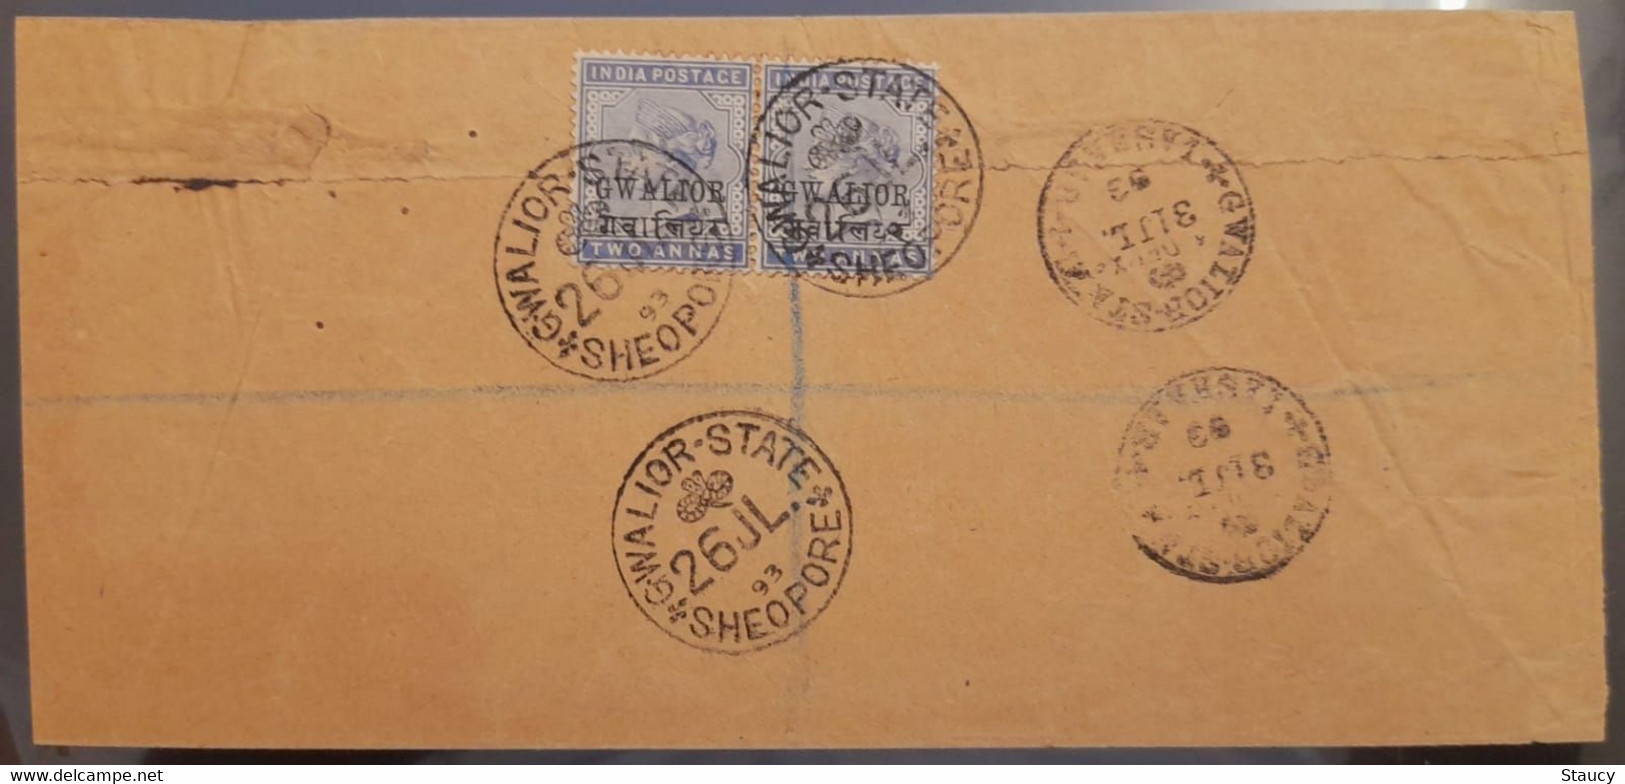 BRITISH INDIA GWALIOR STATE QV 2 X 2 Anna STAMPS FRANKED ON REGISTERED COVER, NICE CANCELLATIONS ON FRONT & BACK, RARE - Gwalior